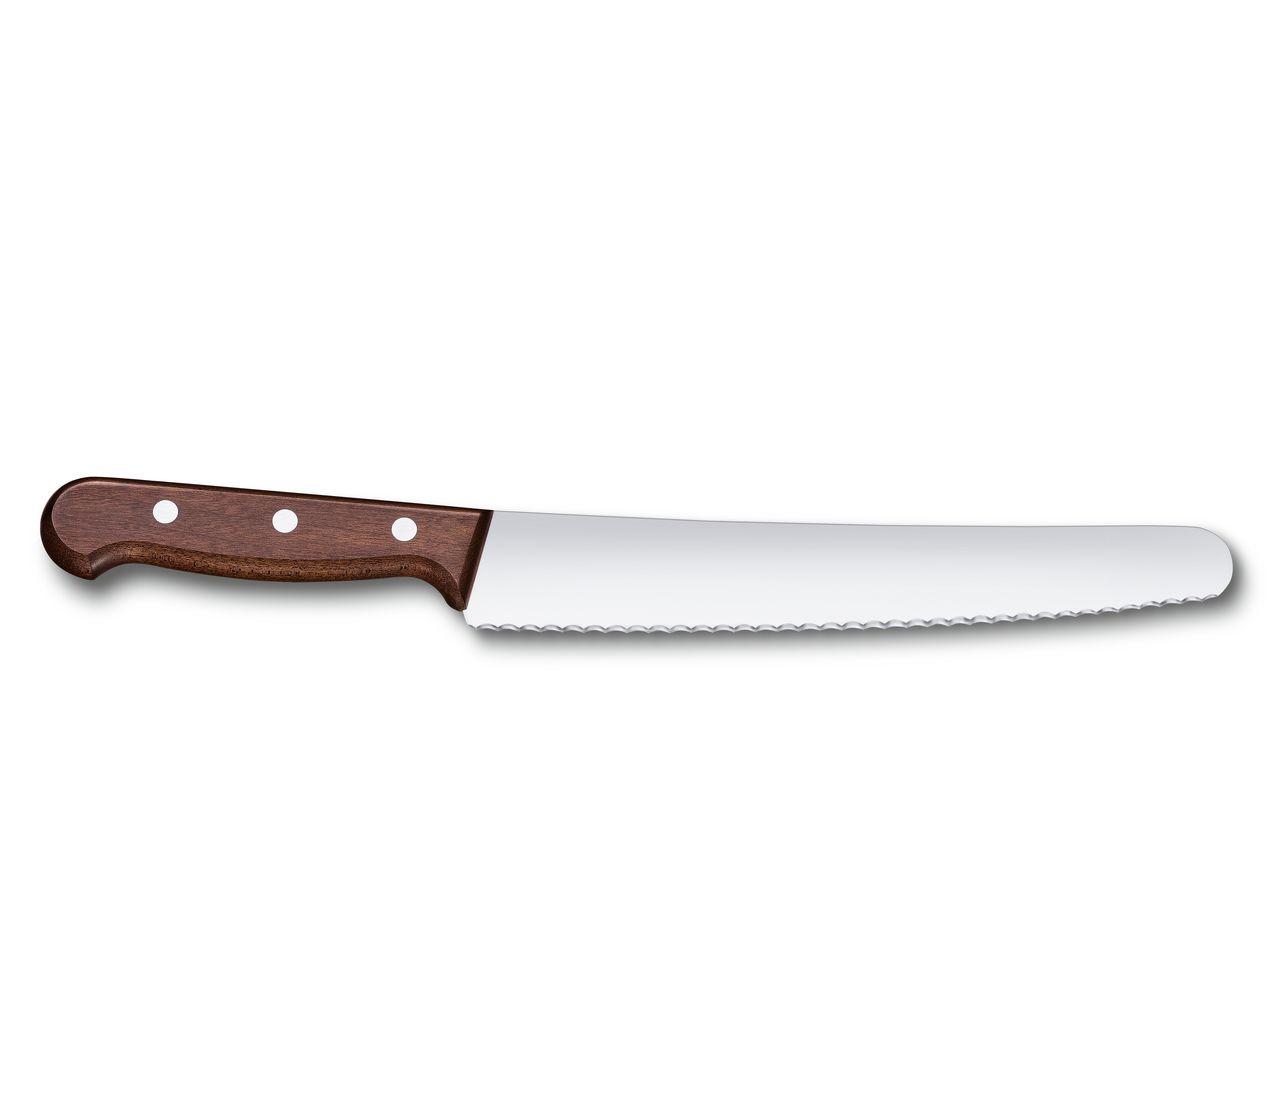 Victorinox Wood Bread and Pastry Knife in Modified Maple - 5.2930.22G